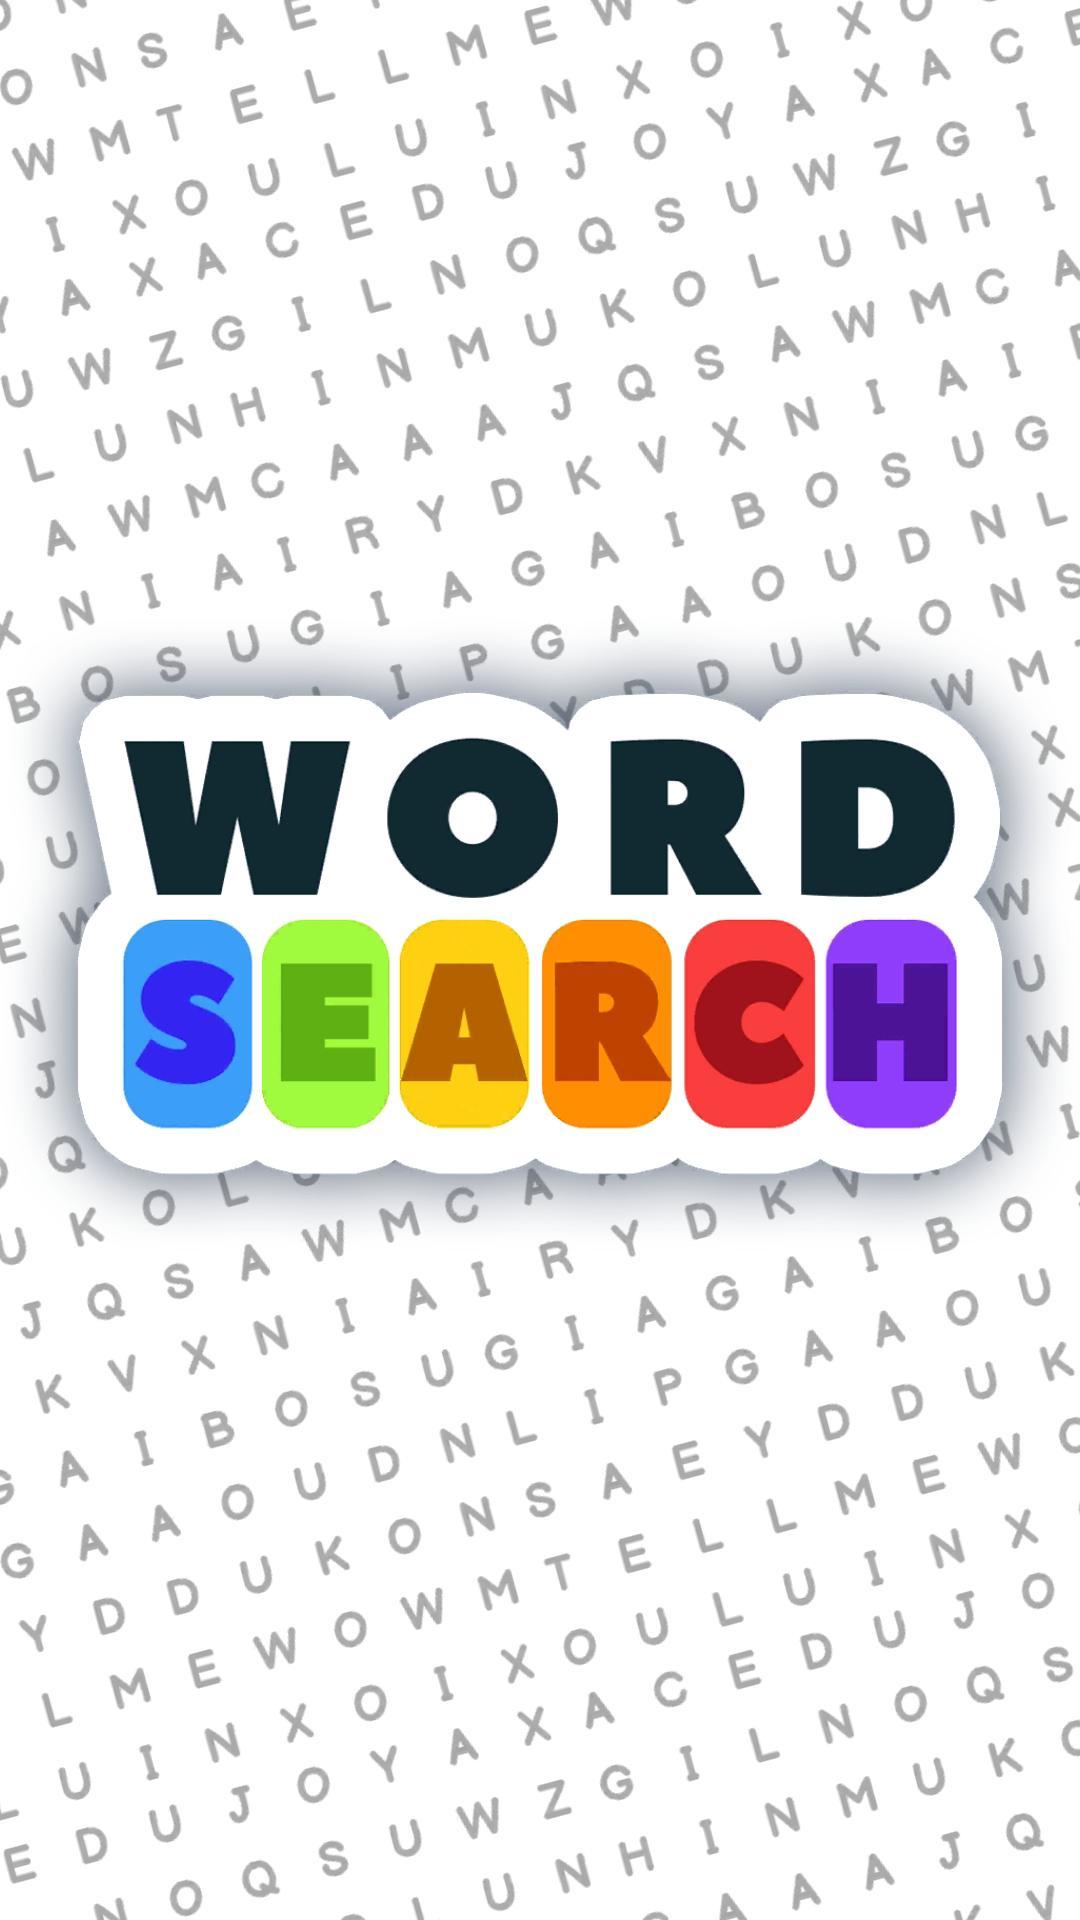 Word Search Games in englishのキャプチャ